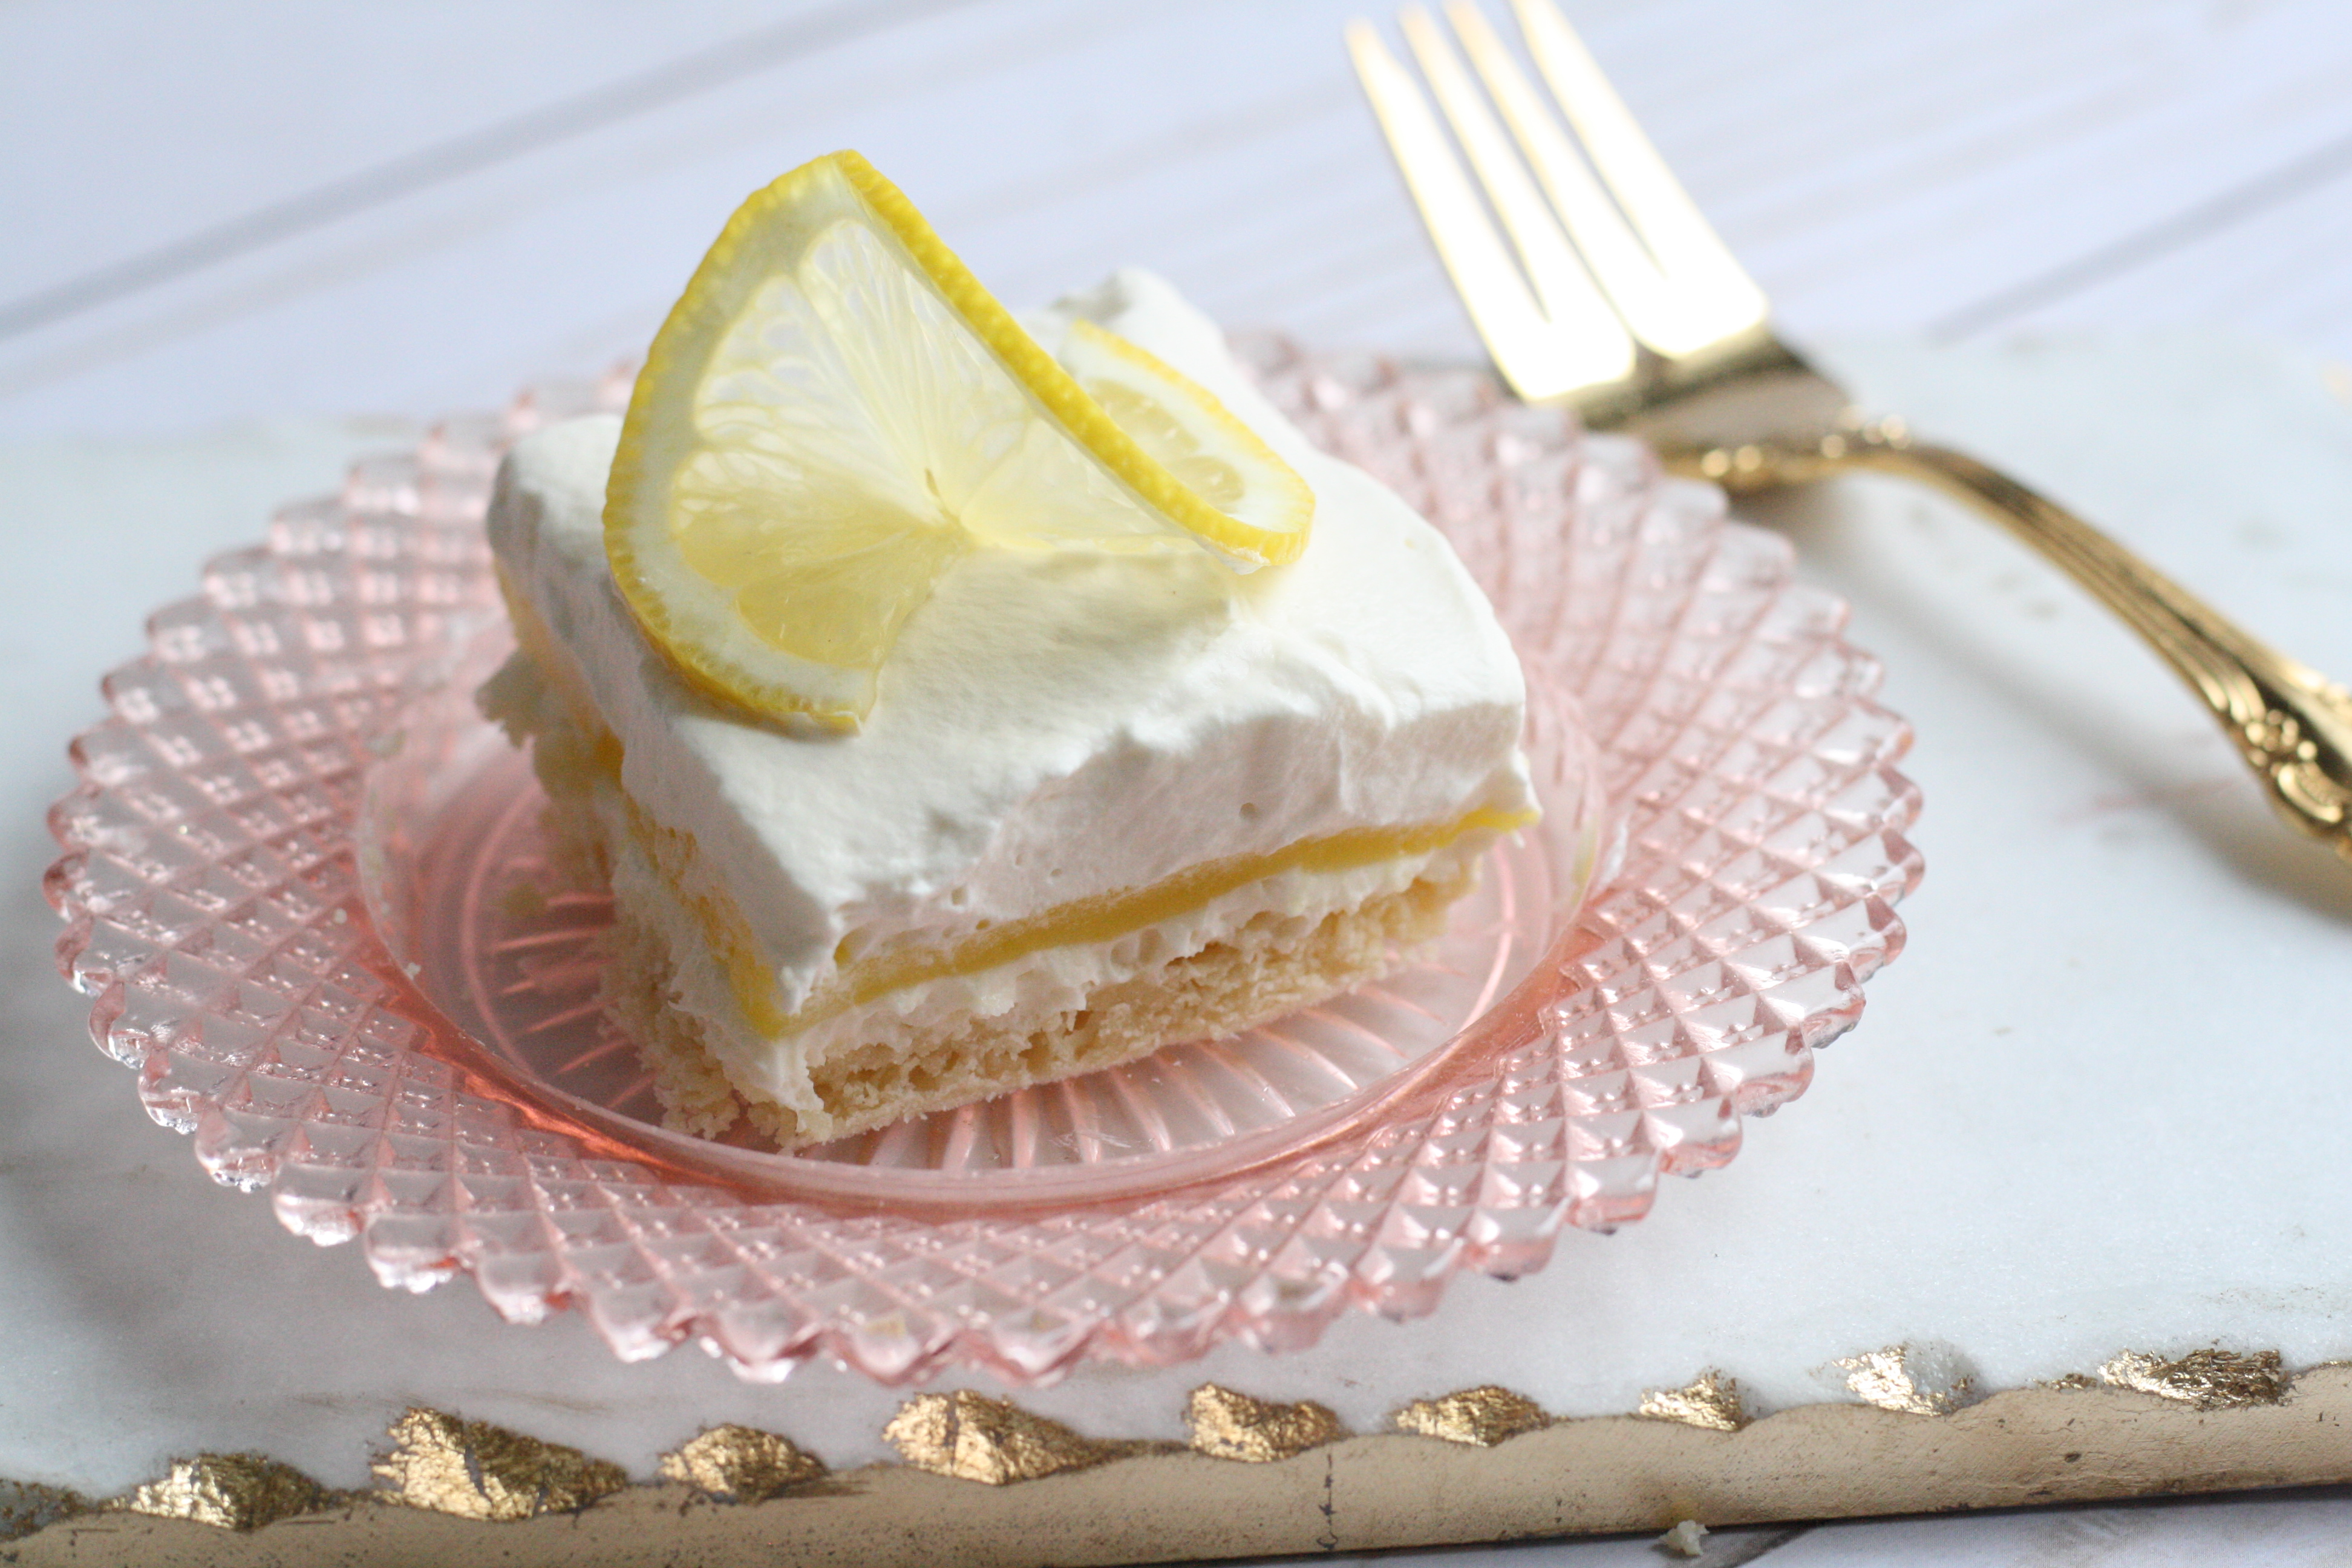 In the Kitchen with My Hannaford Rewards: Layered Lemon Delight